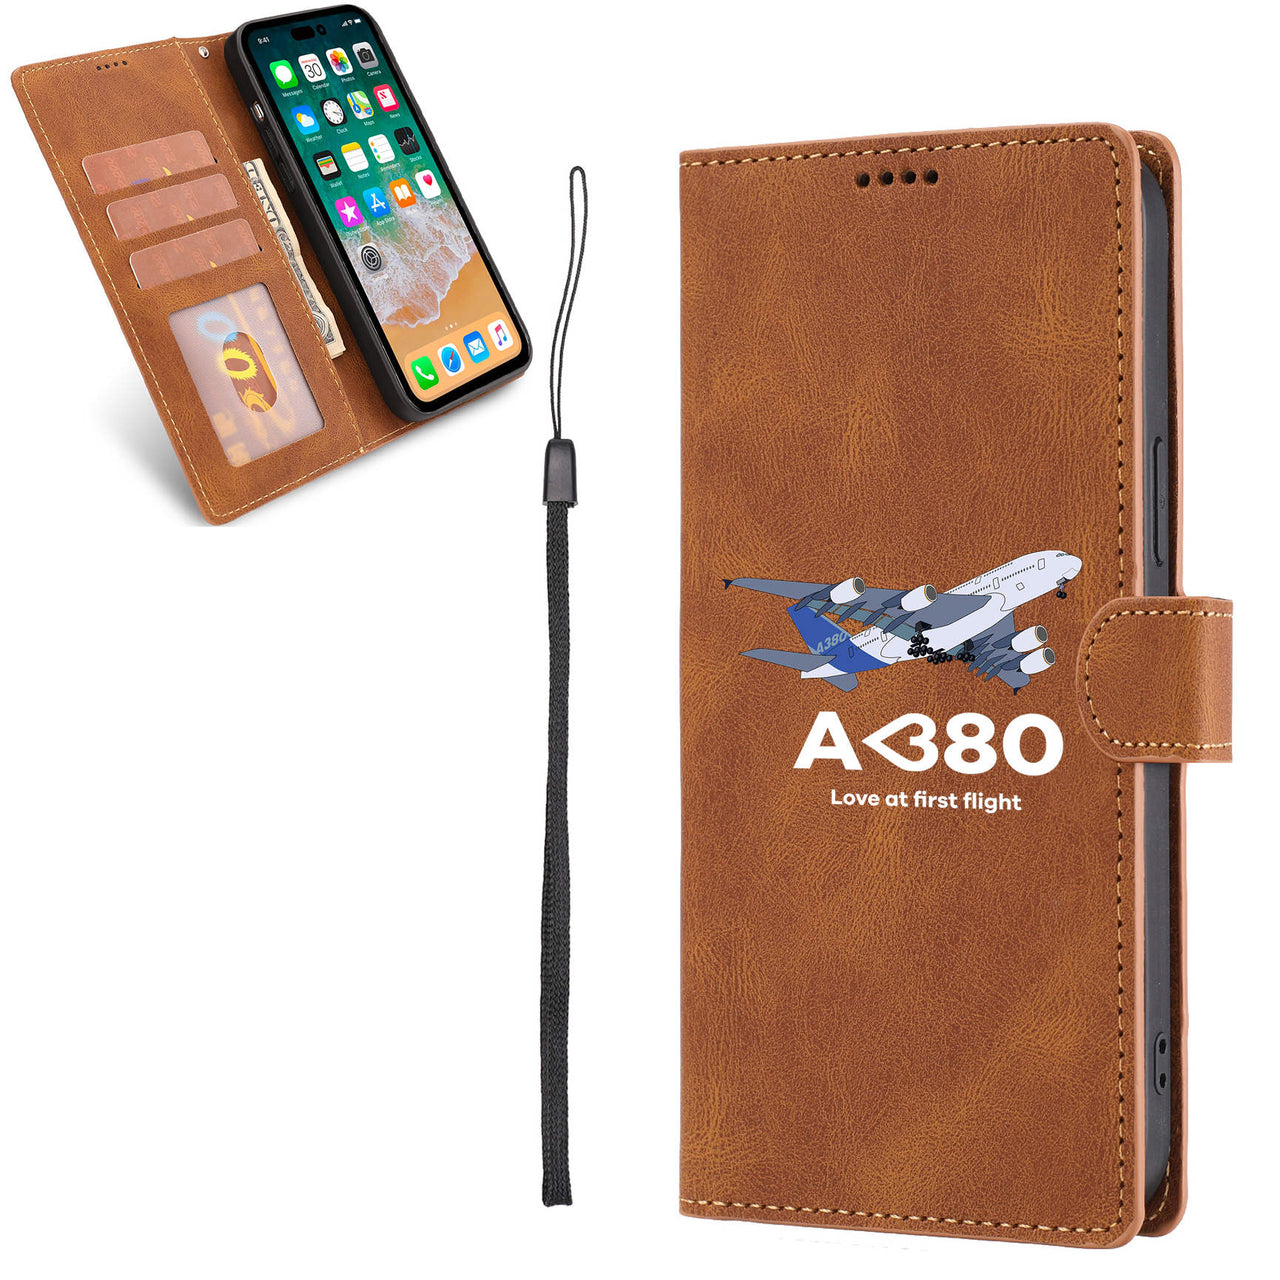 Airbus A380 Love at first flight Designed Leather iPhone Cases